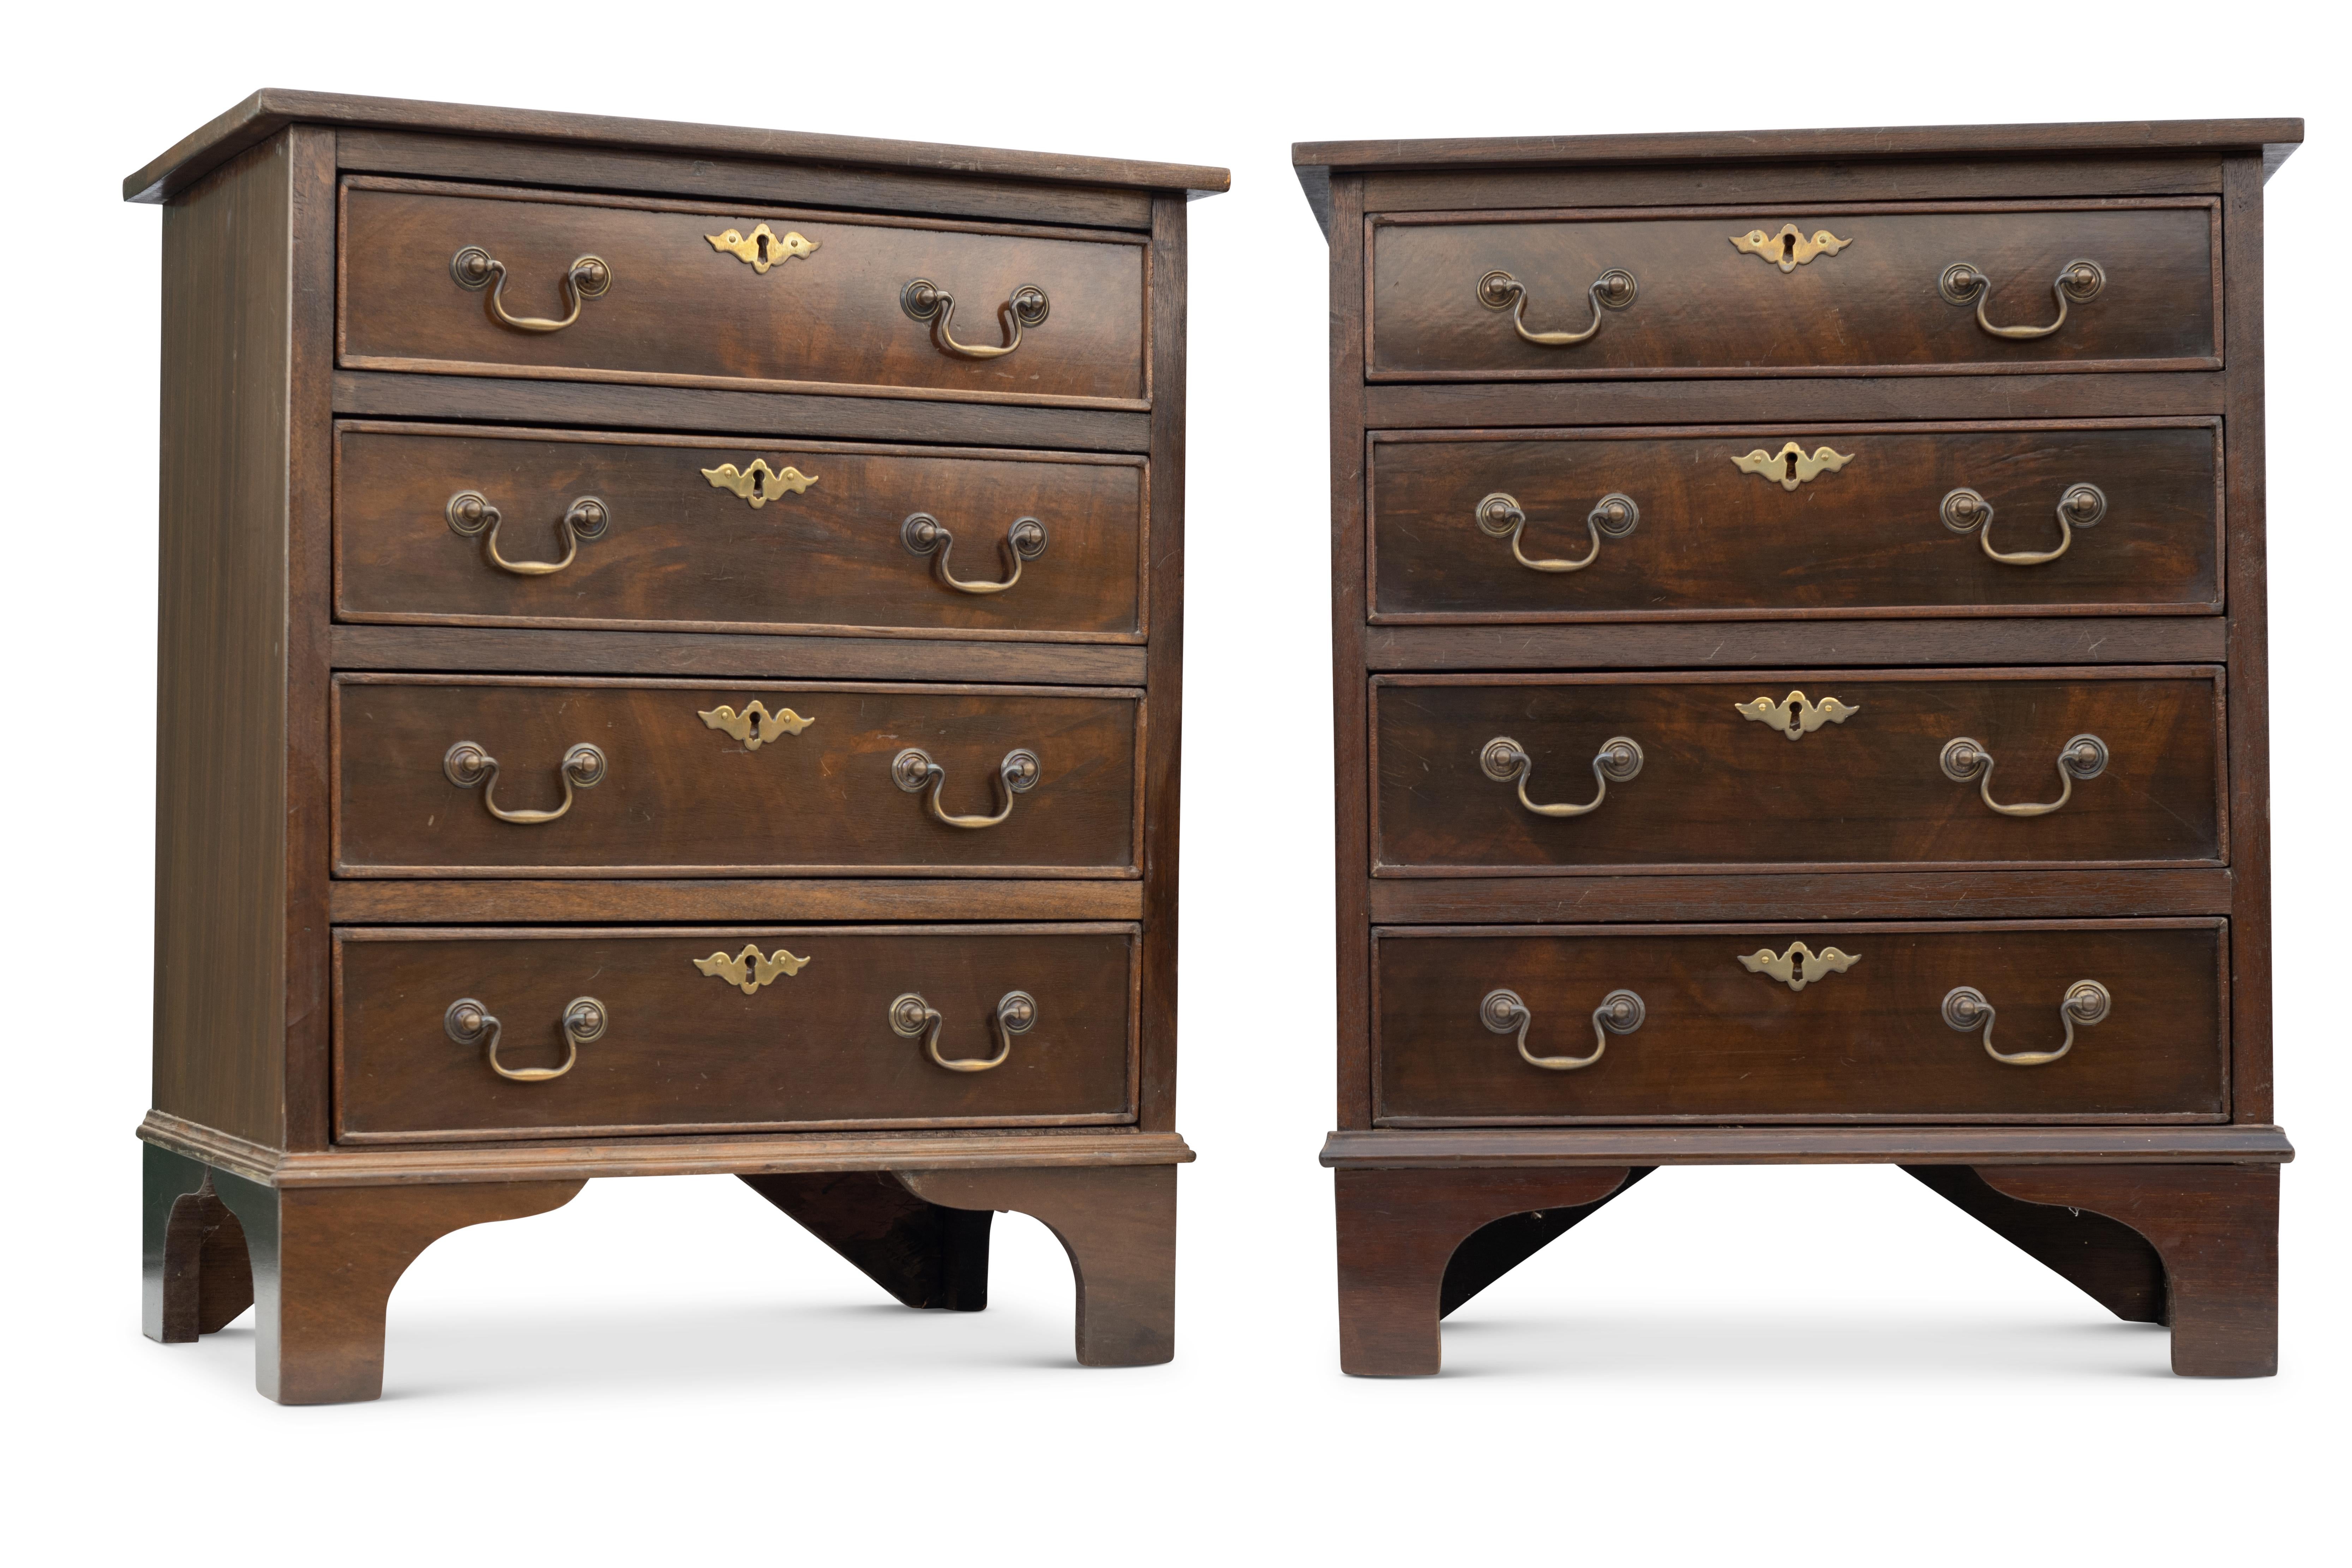 British Georgian Design Pair of Antique Bedside Chest of Drawers & Brass Batwing Handles For Sale